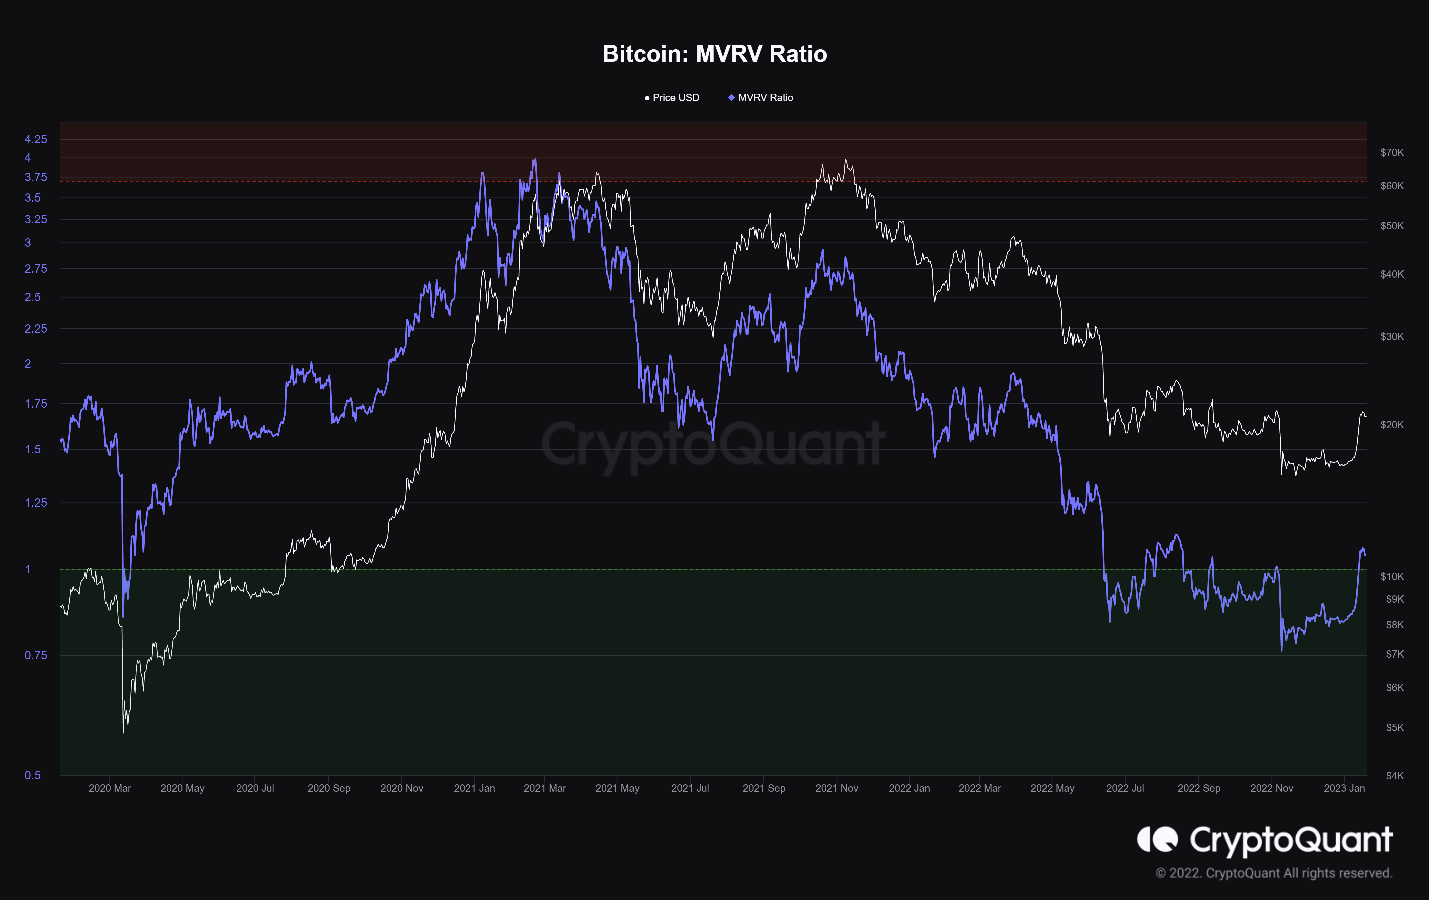 MVRV Ratio Showing Early Bull Market Signs